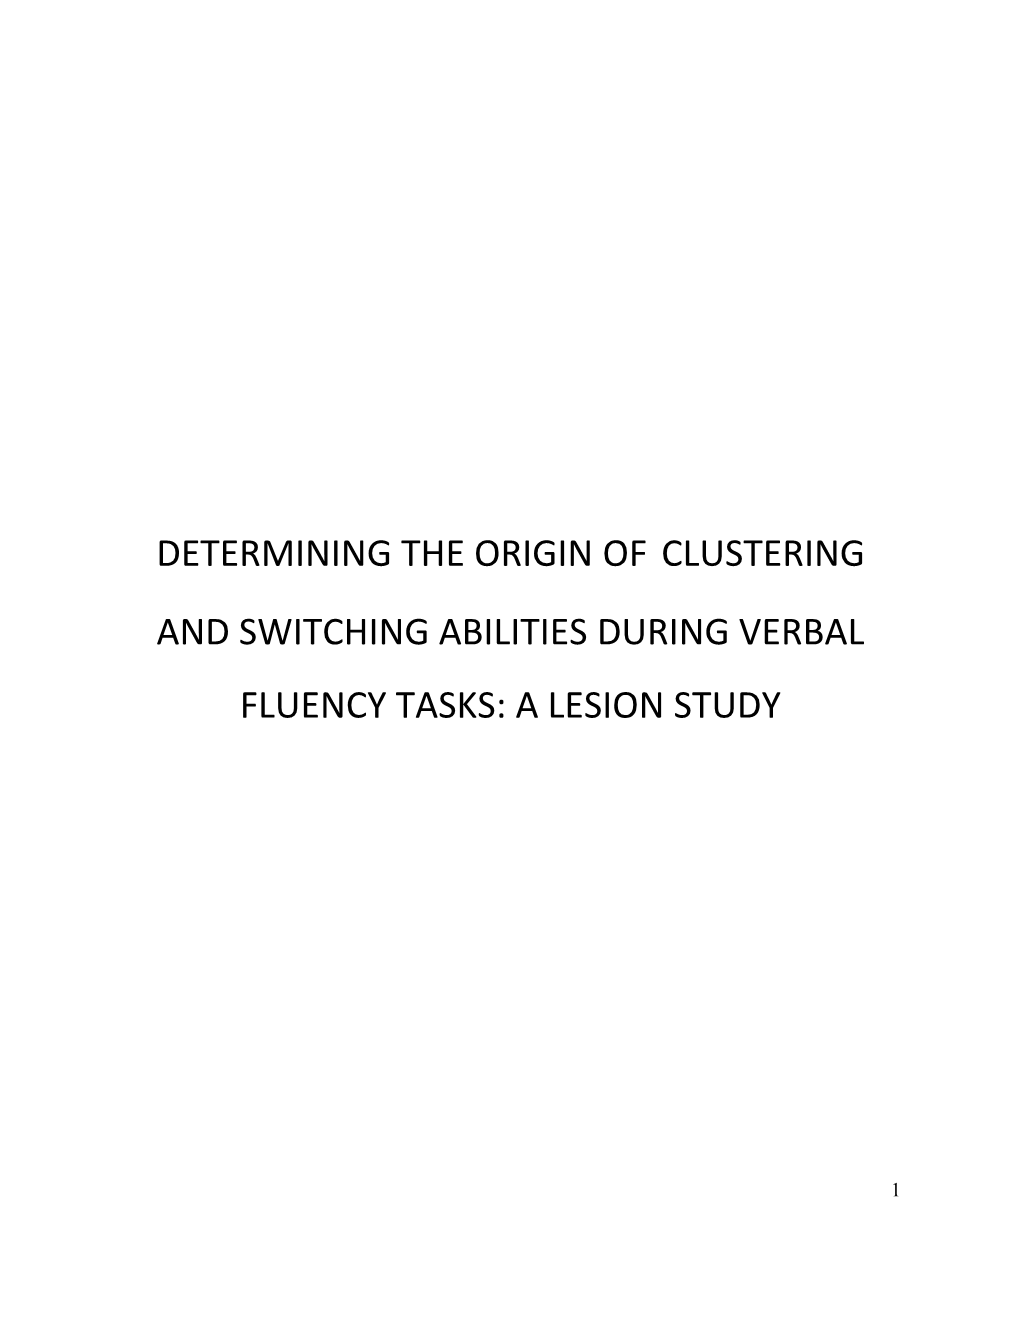 Determining the Origin Ofclustering and Switching Abilities During Verbal Fluency Tasks